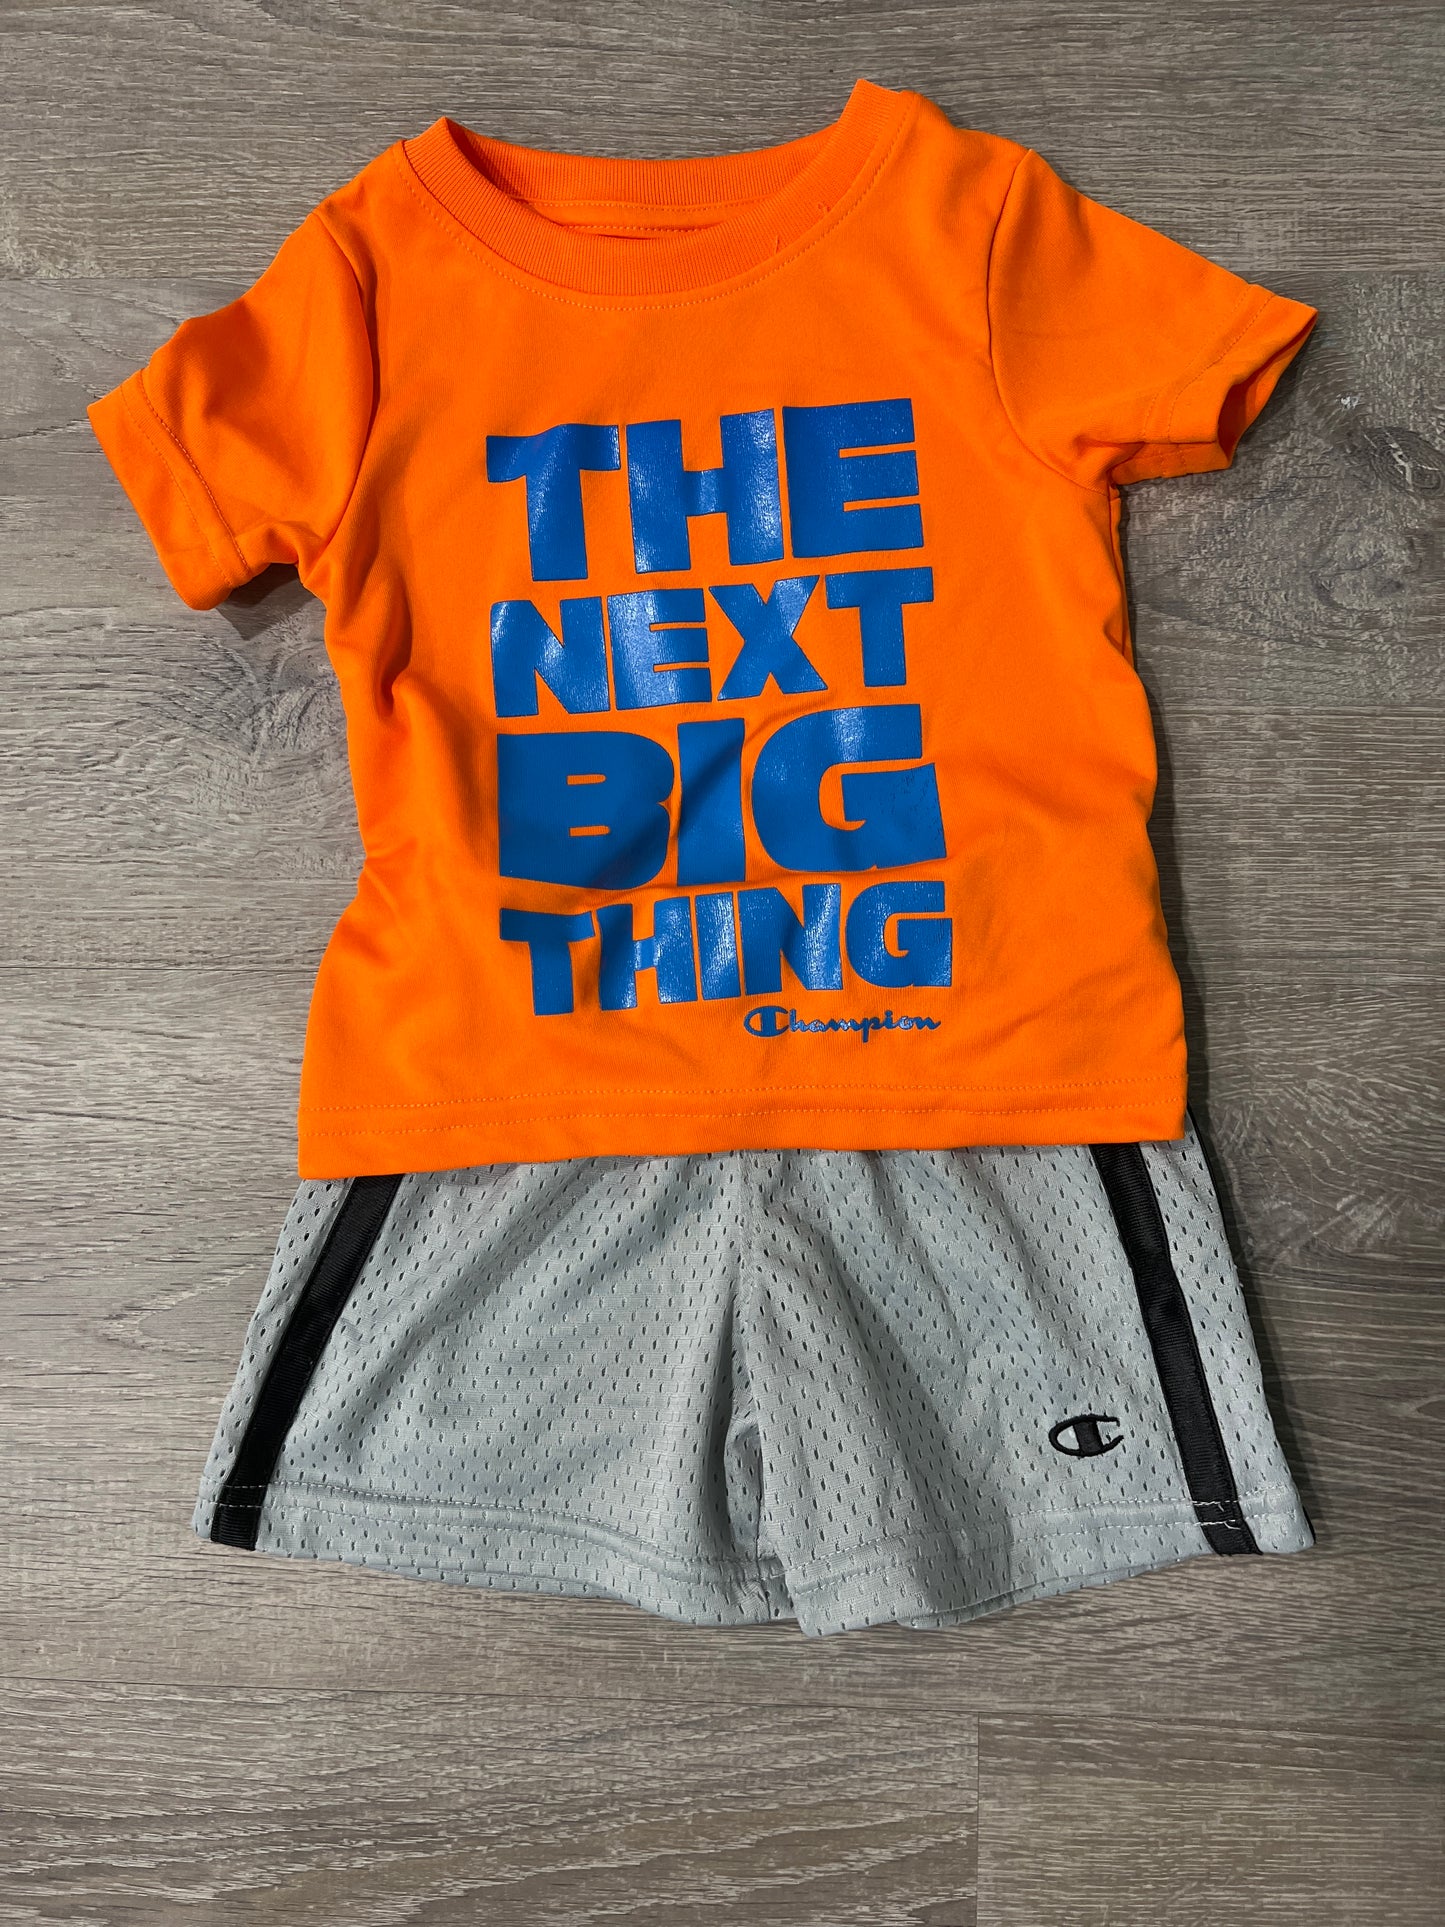 Boys 18mo Champion outfit